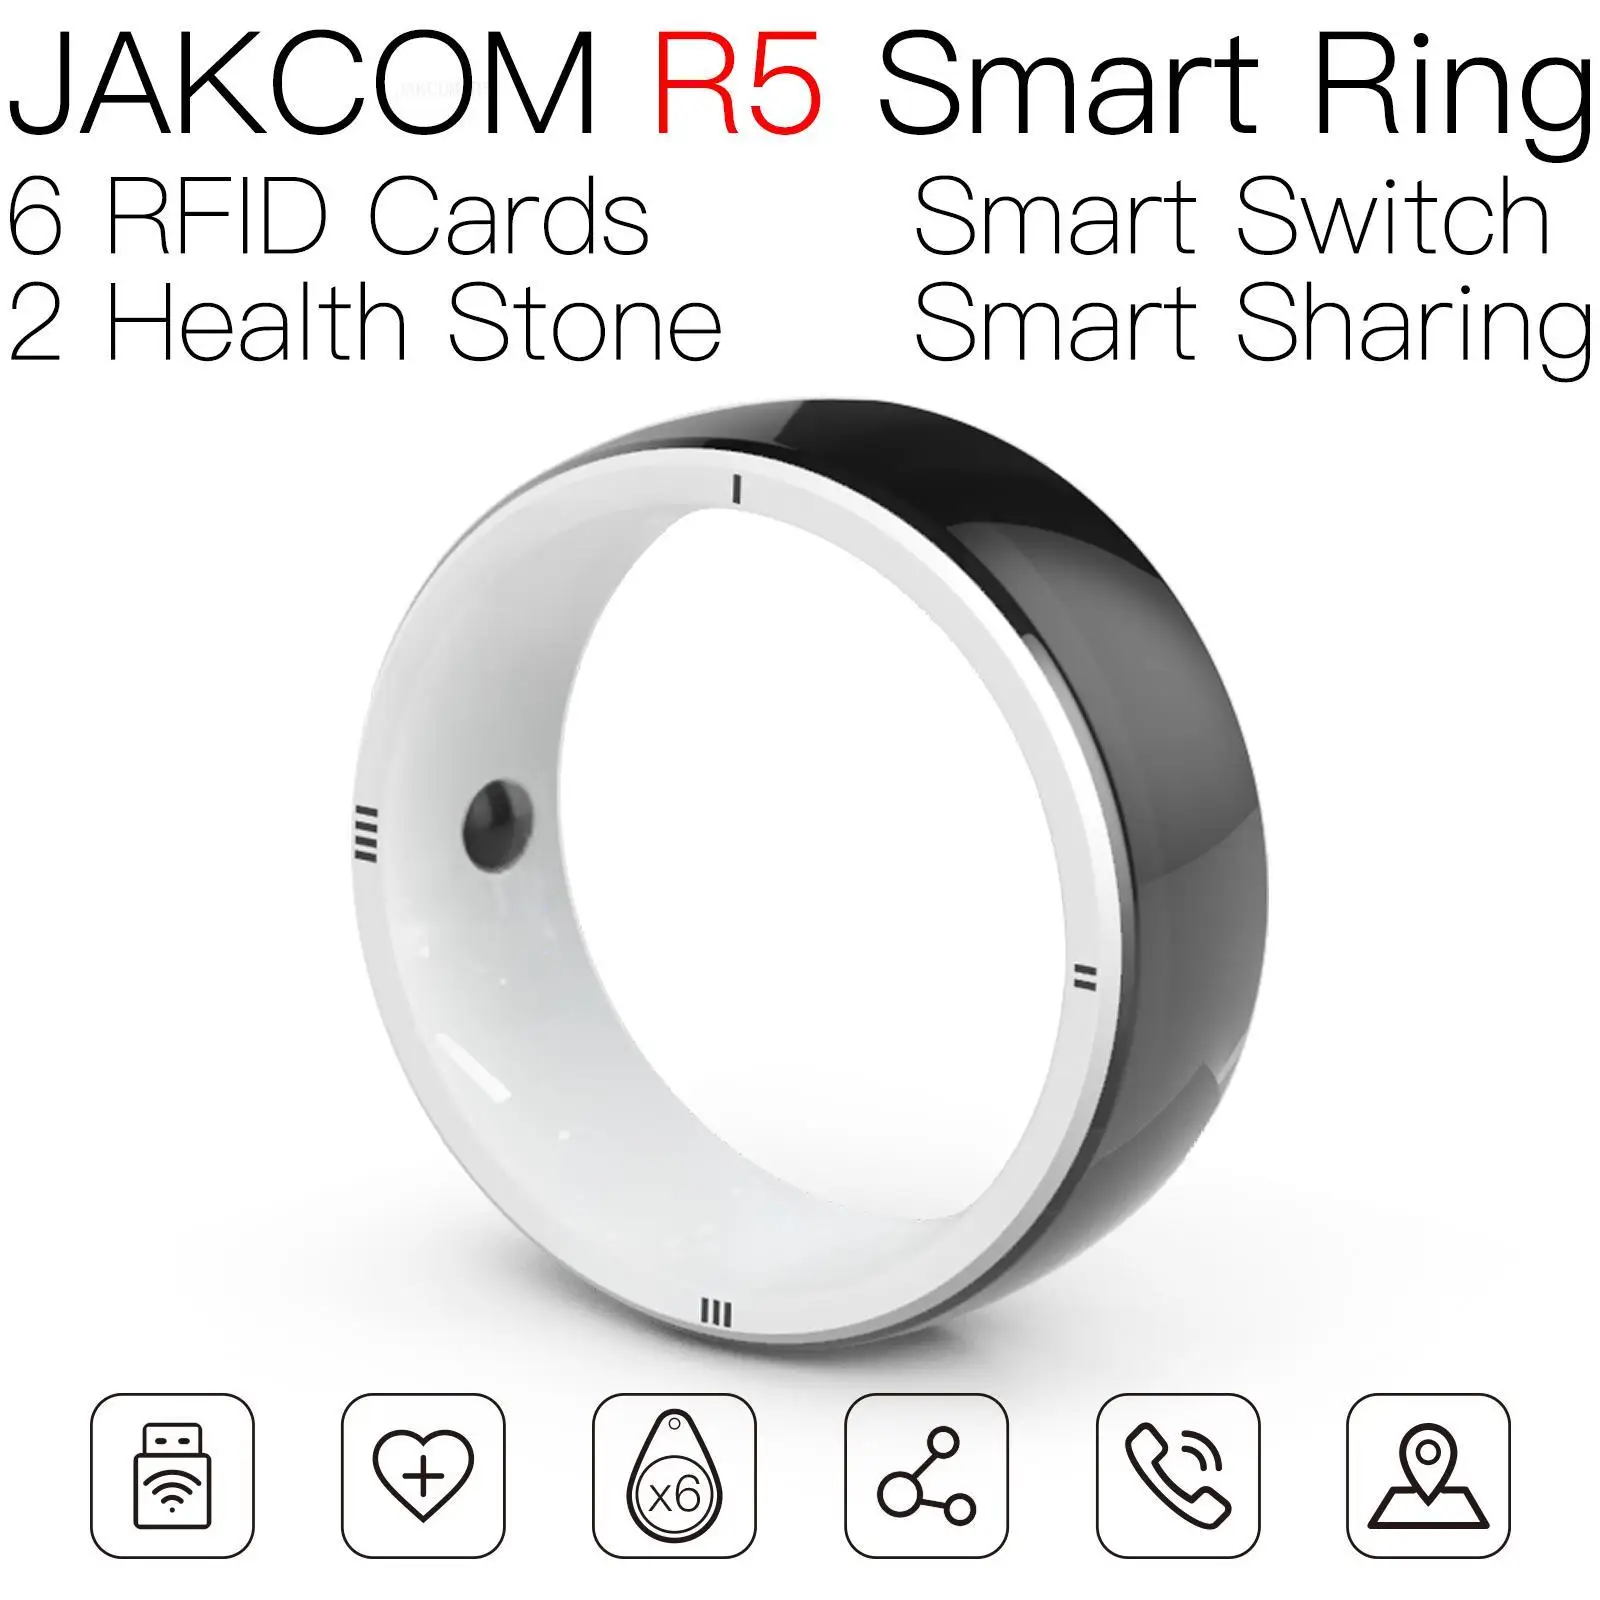 

JAKCOM R5 Smart Ring Super value than key tag round nfc card personalized kit rfid sticker for lock lable inkjet printable chip